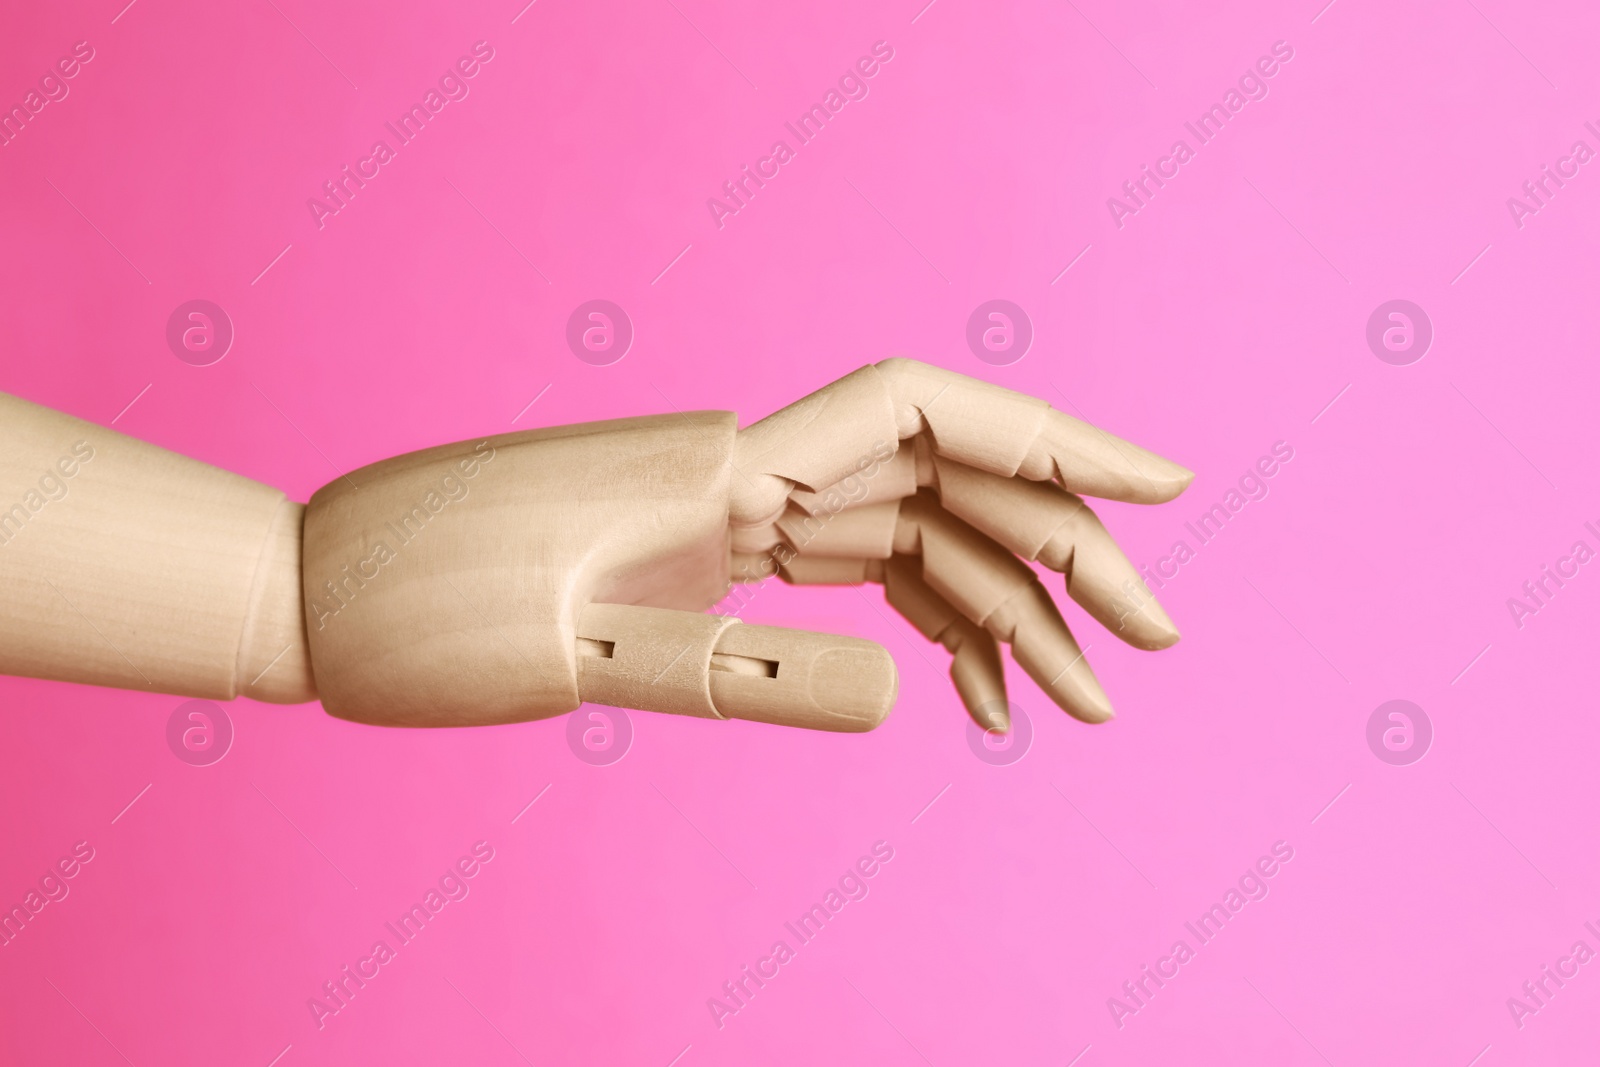 Photo of Wooden hand model on pink background. Mannequin part